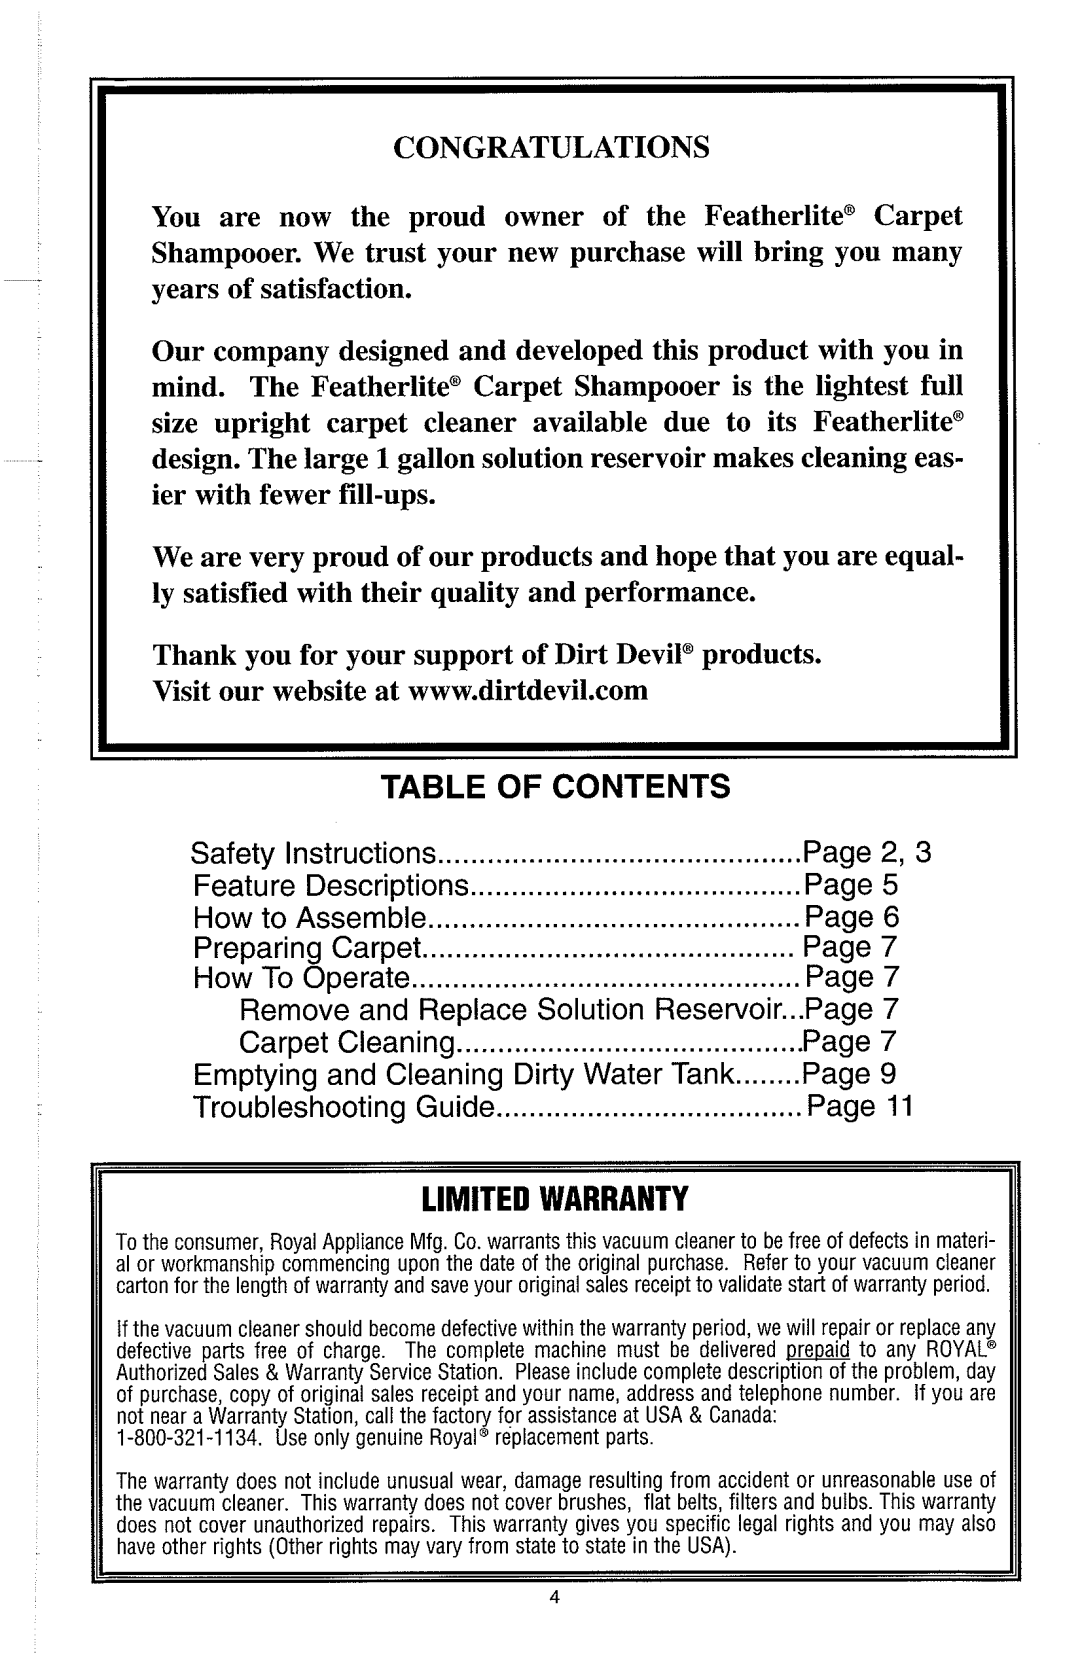 Dirt Devil Carpet Shampooer Limited Warranty, Congratulations, Table Of Contents, Safety Instructions, How to Assemble 